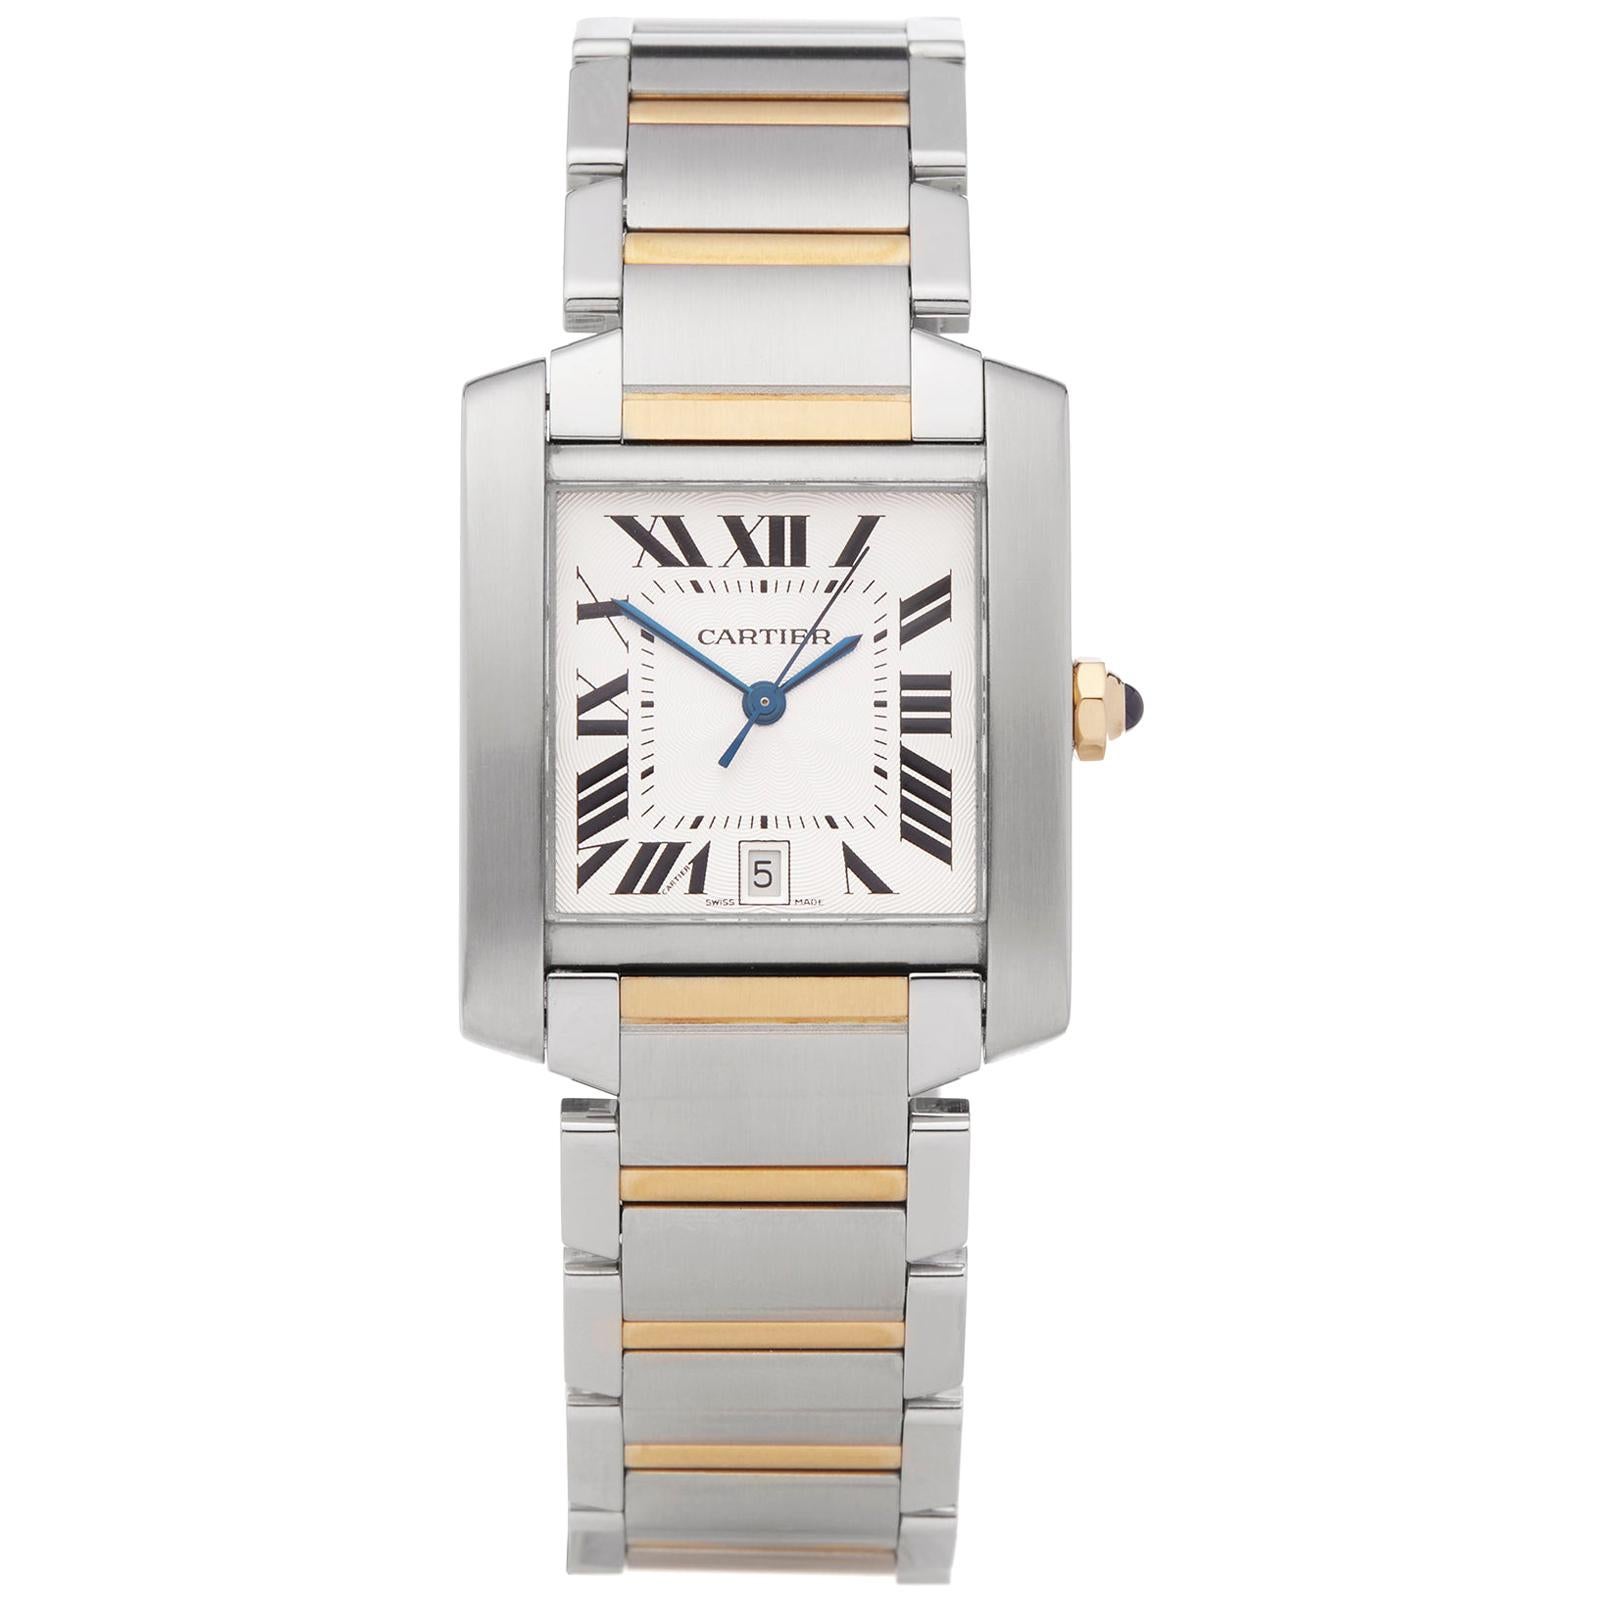 Cartier Tank Francaise Stainless Steel and Yellow Gold 2302